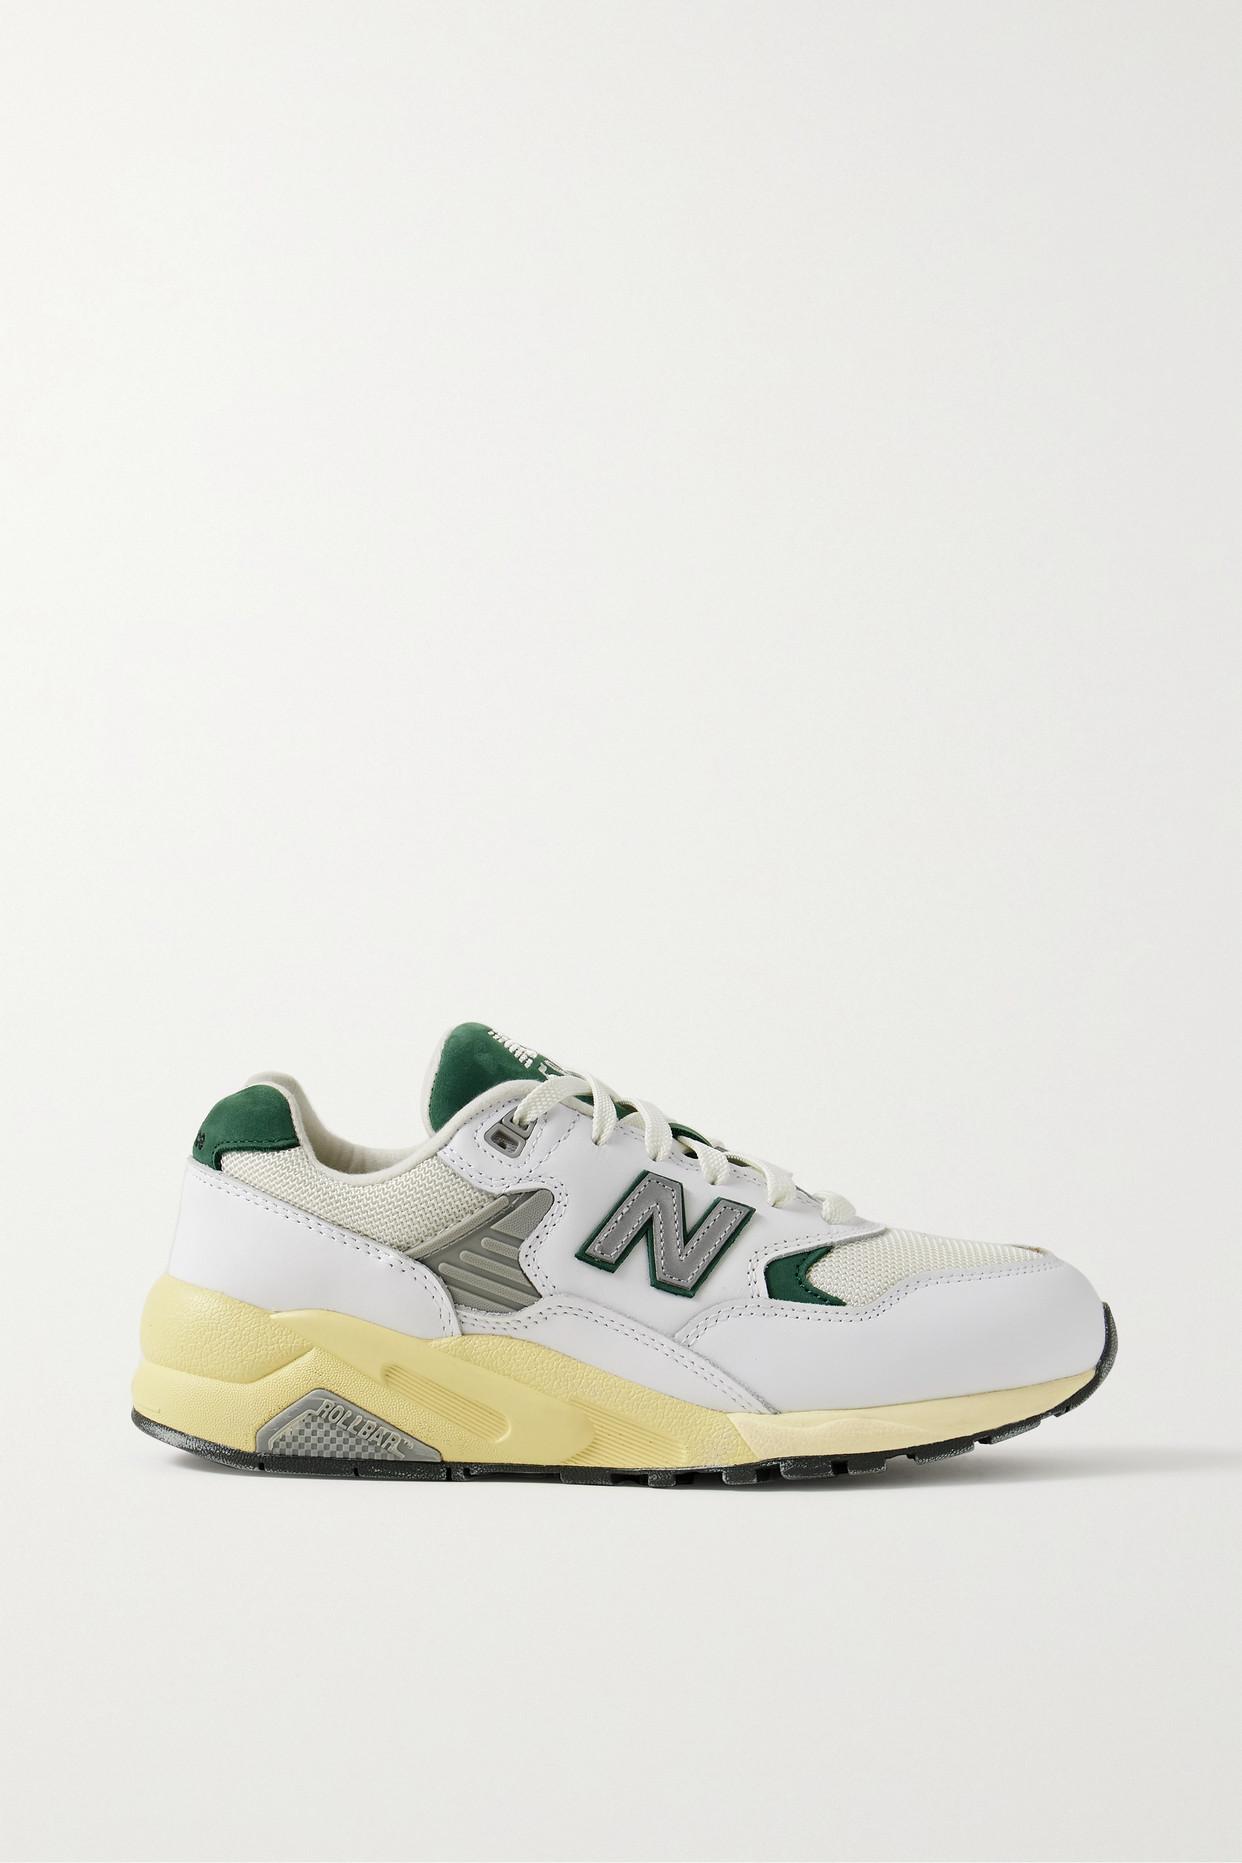 New Balance Mt580 Rubber-trimmed Mesh, Nubuck And Leather Sneakers in ...